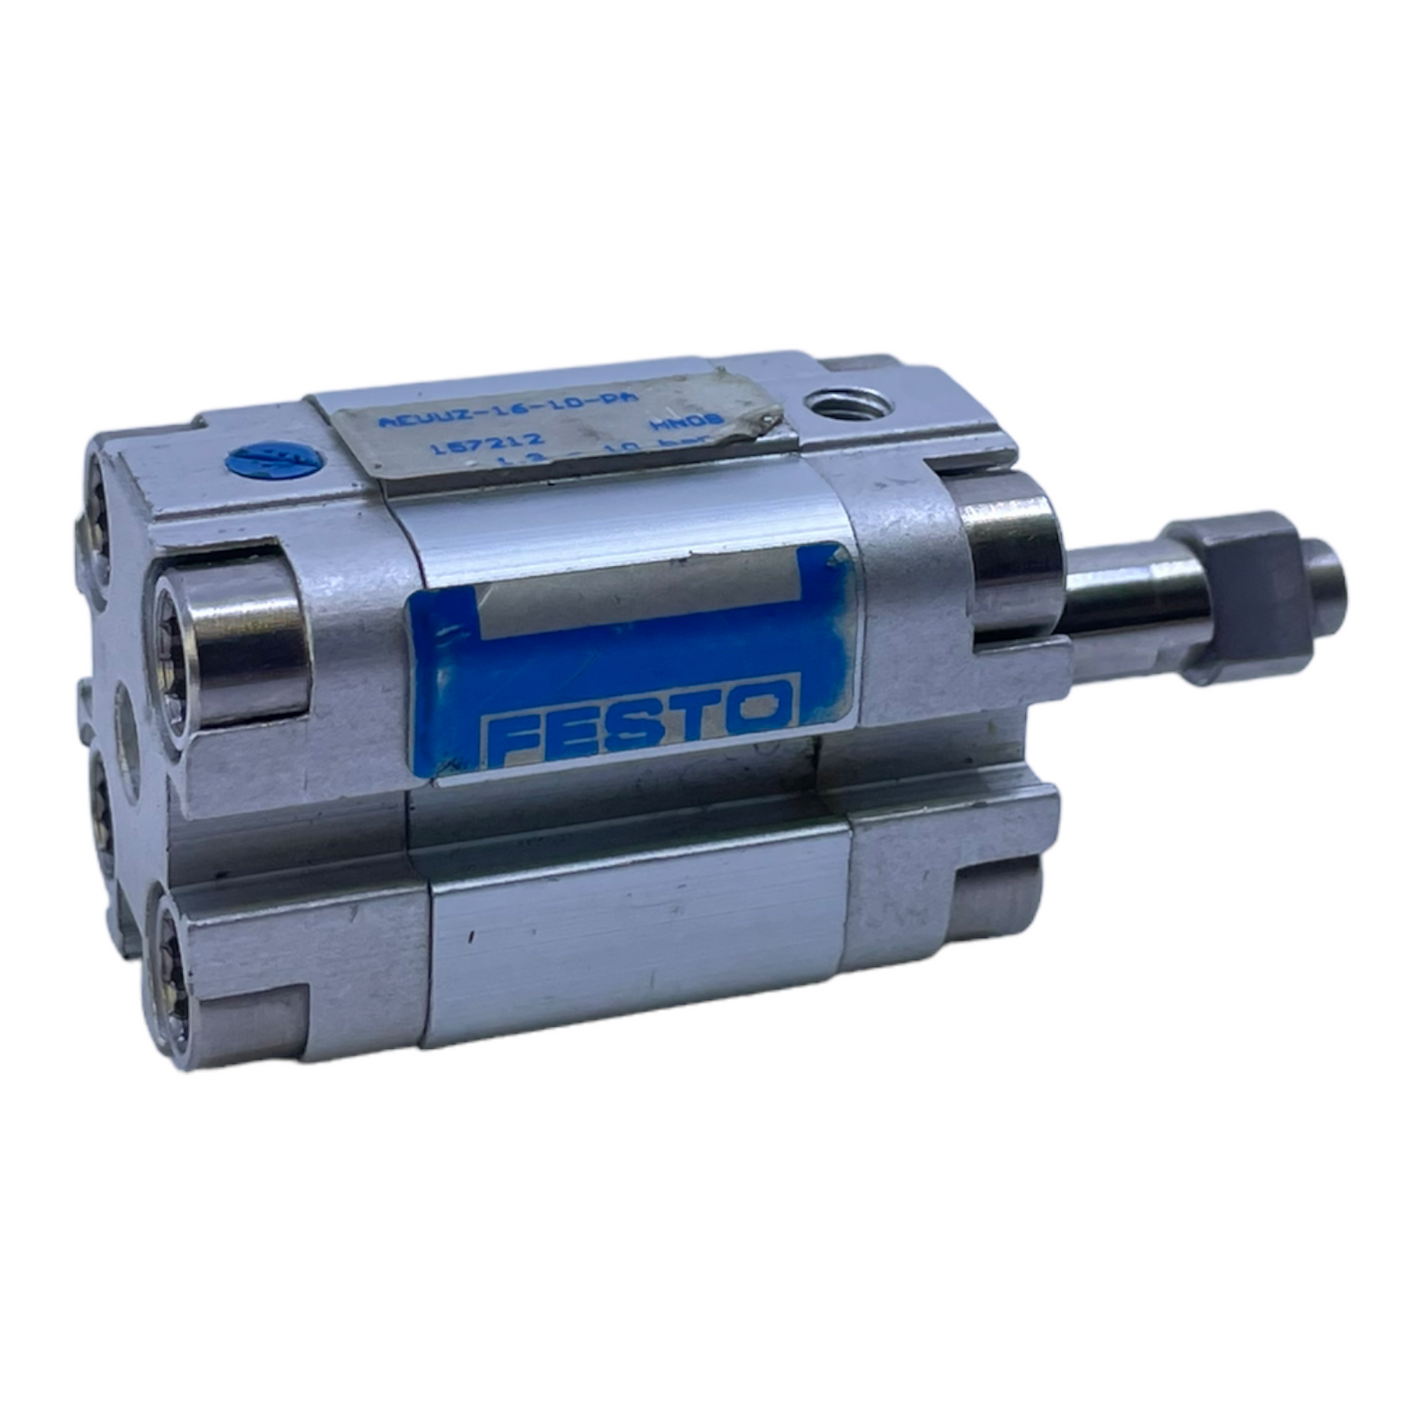 Festo AEVUZ-16-10PA compact cylinder 157212 1.3-10bar for industrial use